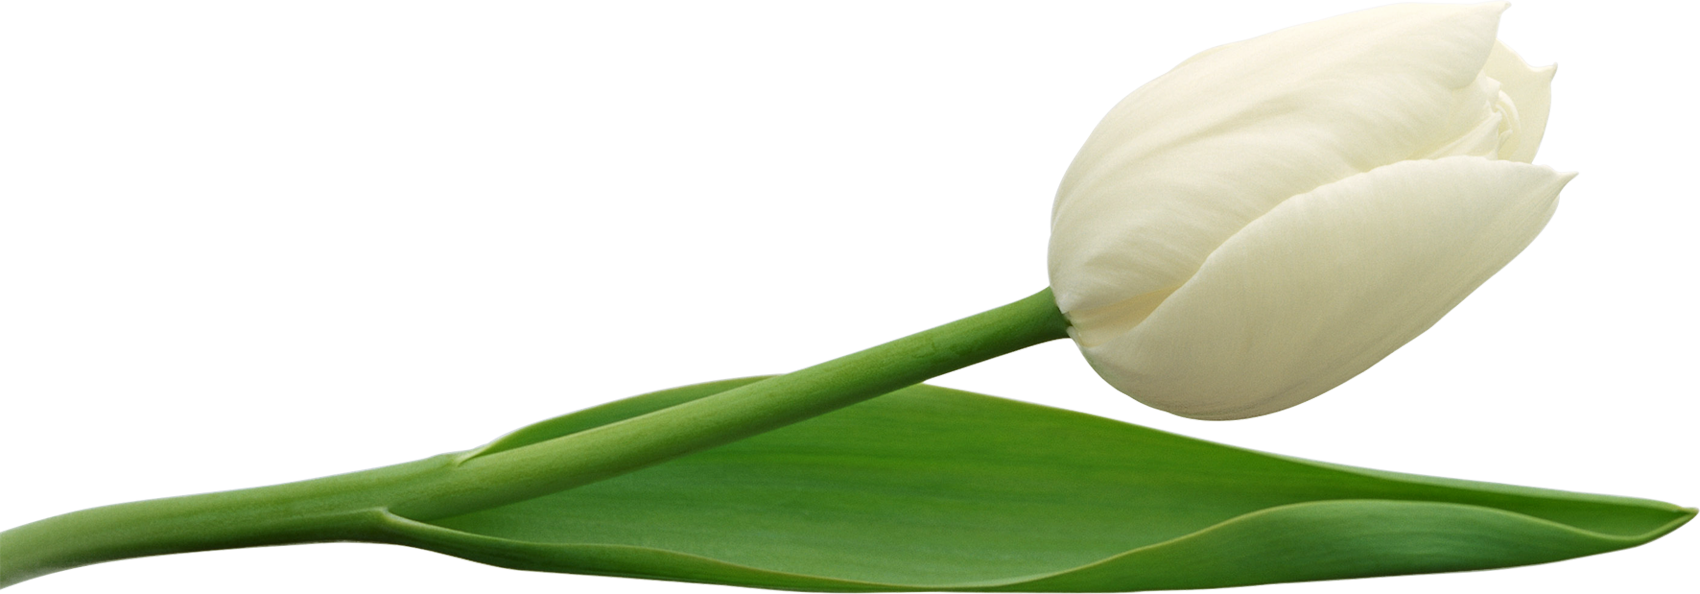 Download PNG image - White Tulip PNG 